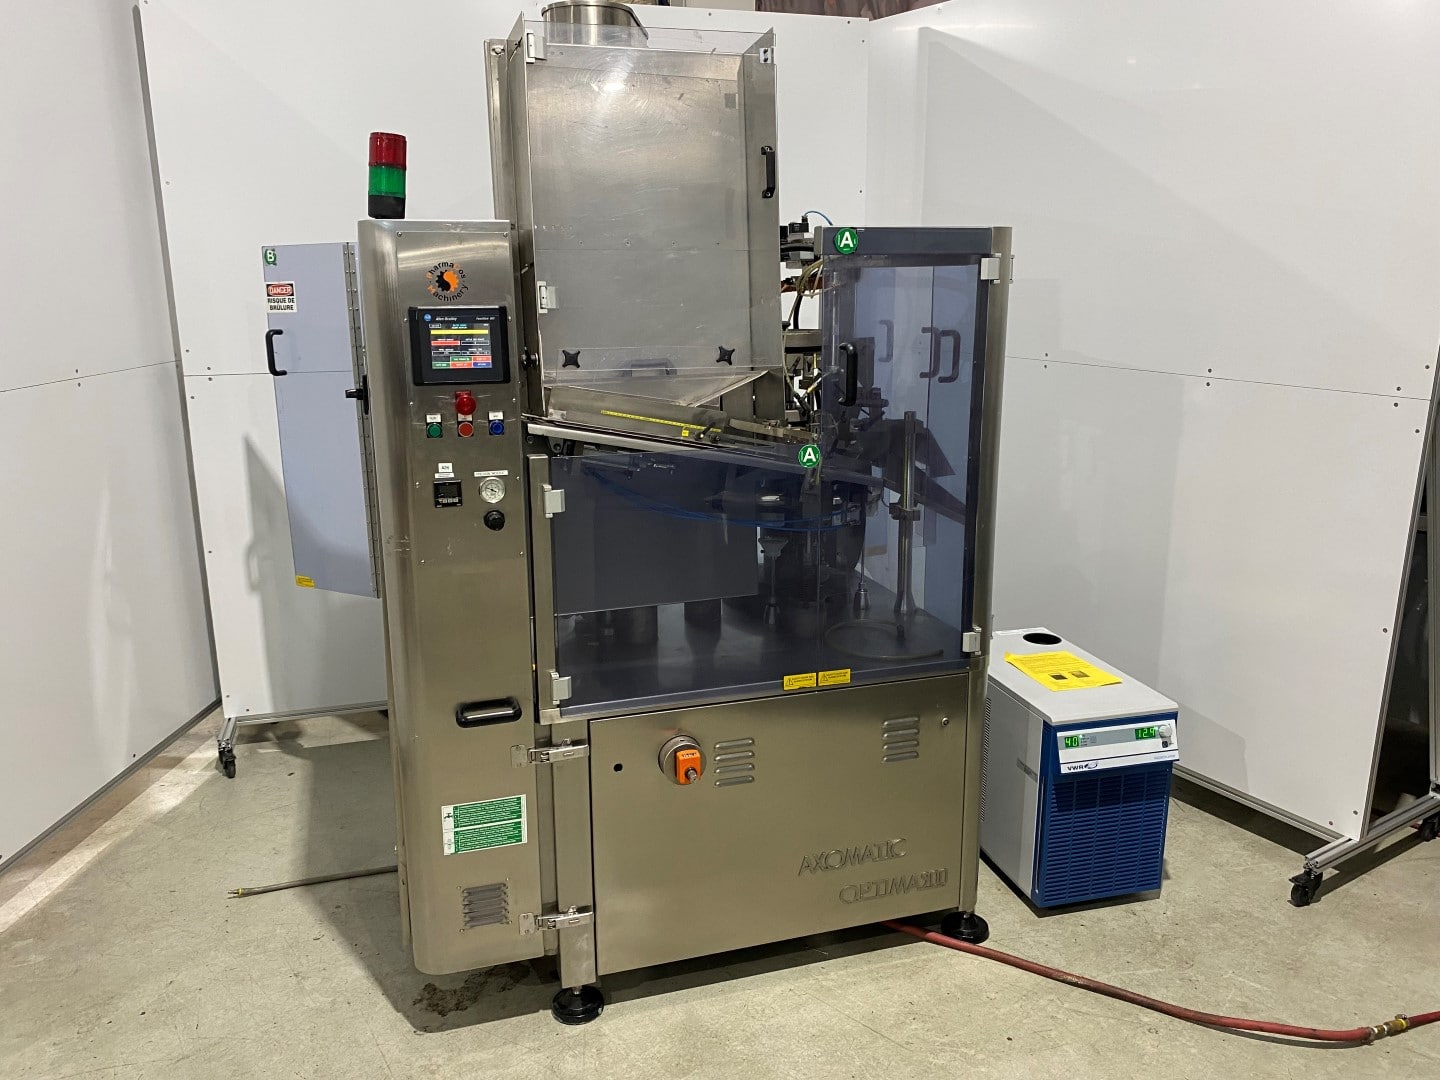 Used Axomatic Optima 900 plastic tube filler with VWR chiller and many filler change parts